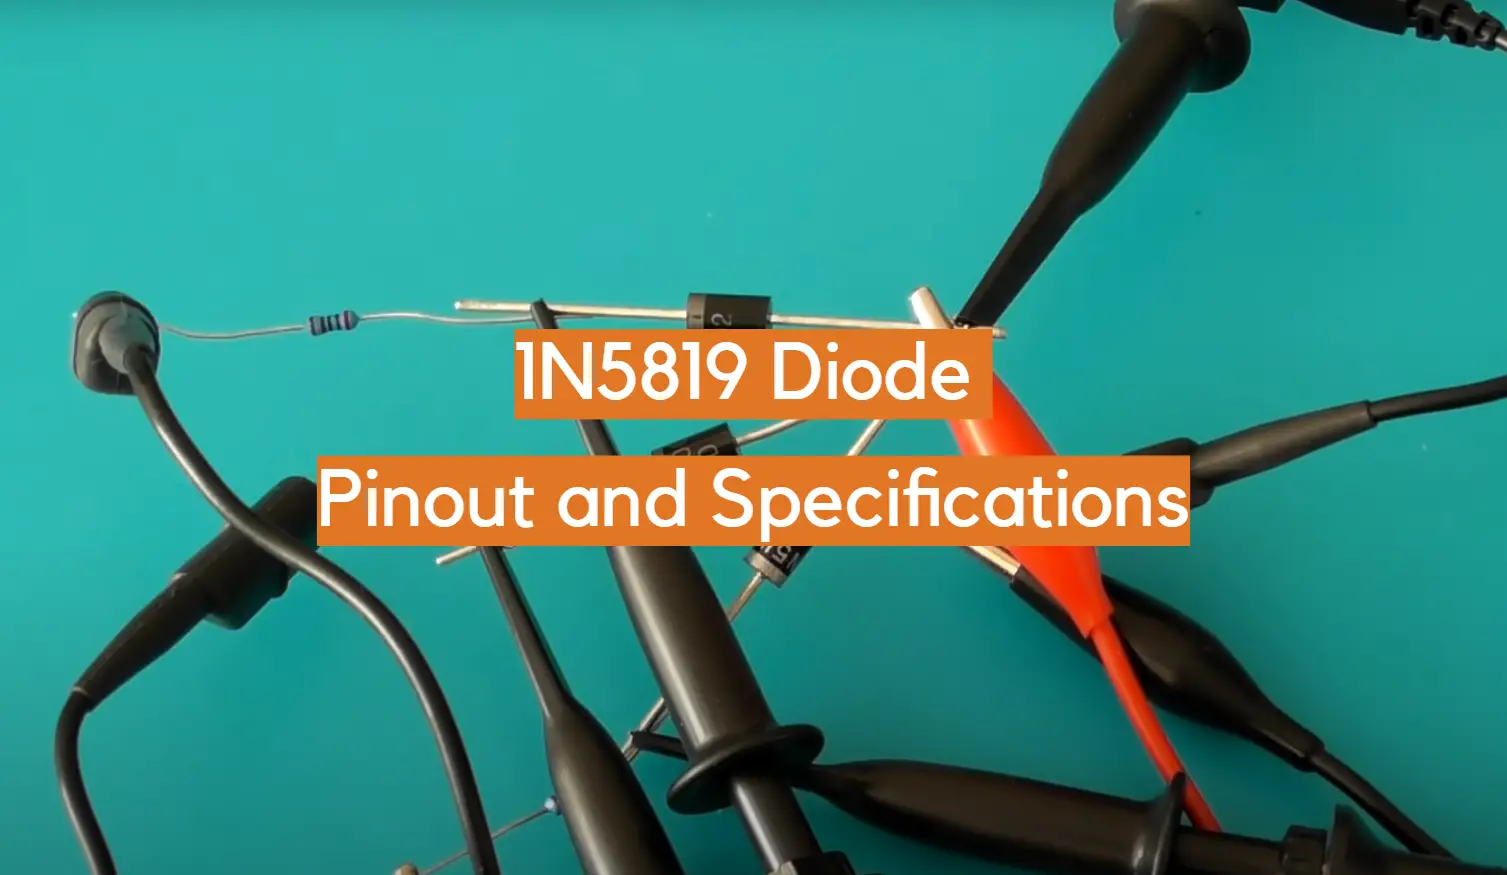 1N5819 Diode Pinout and Specifications